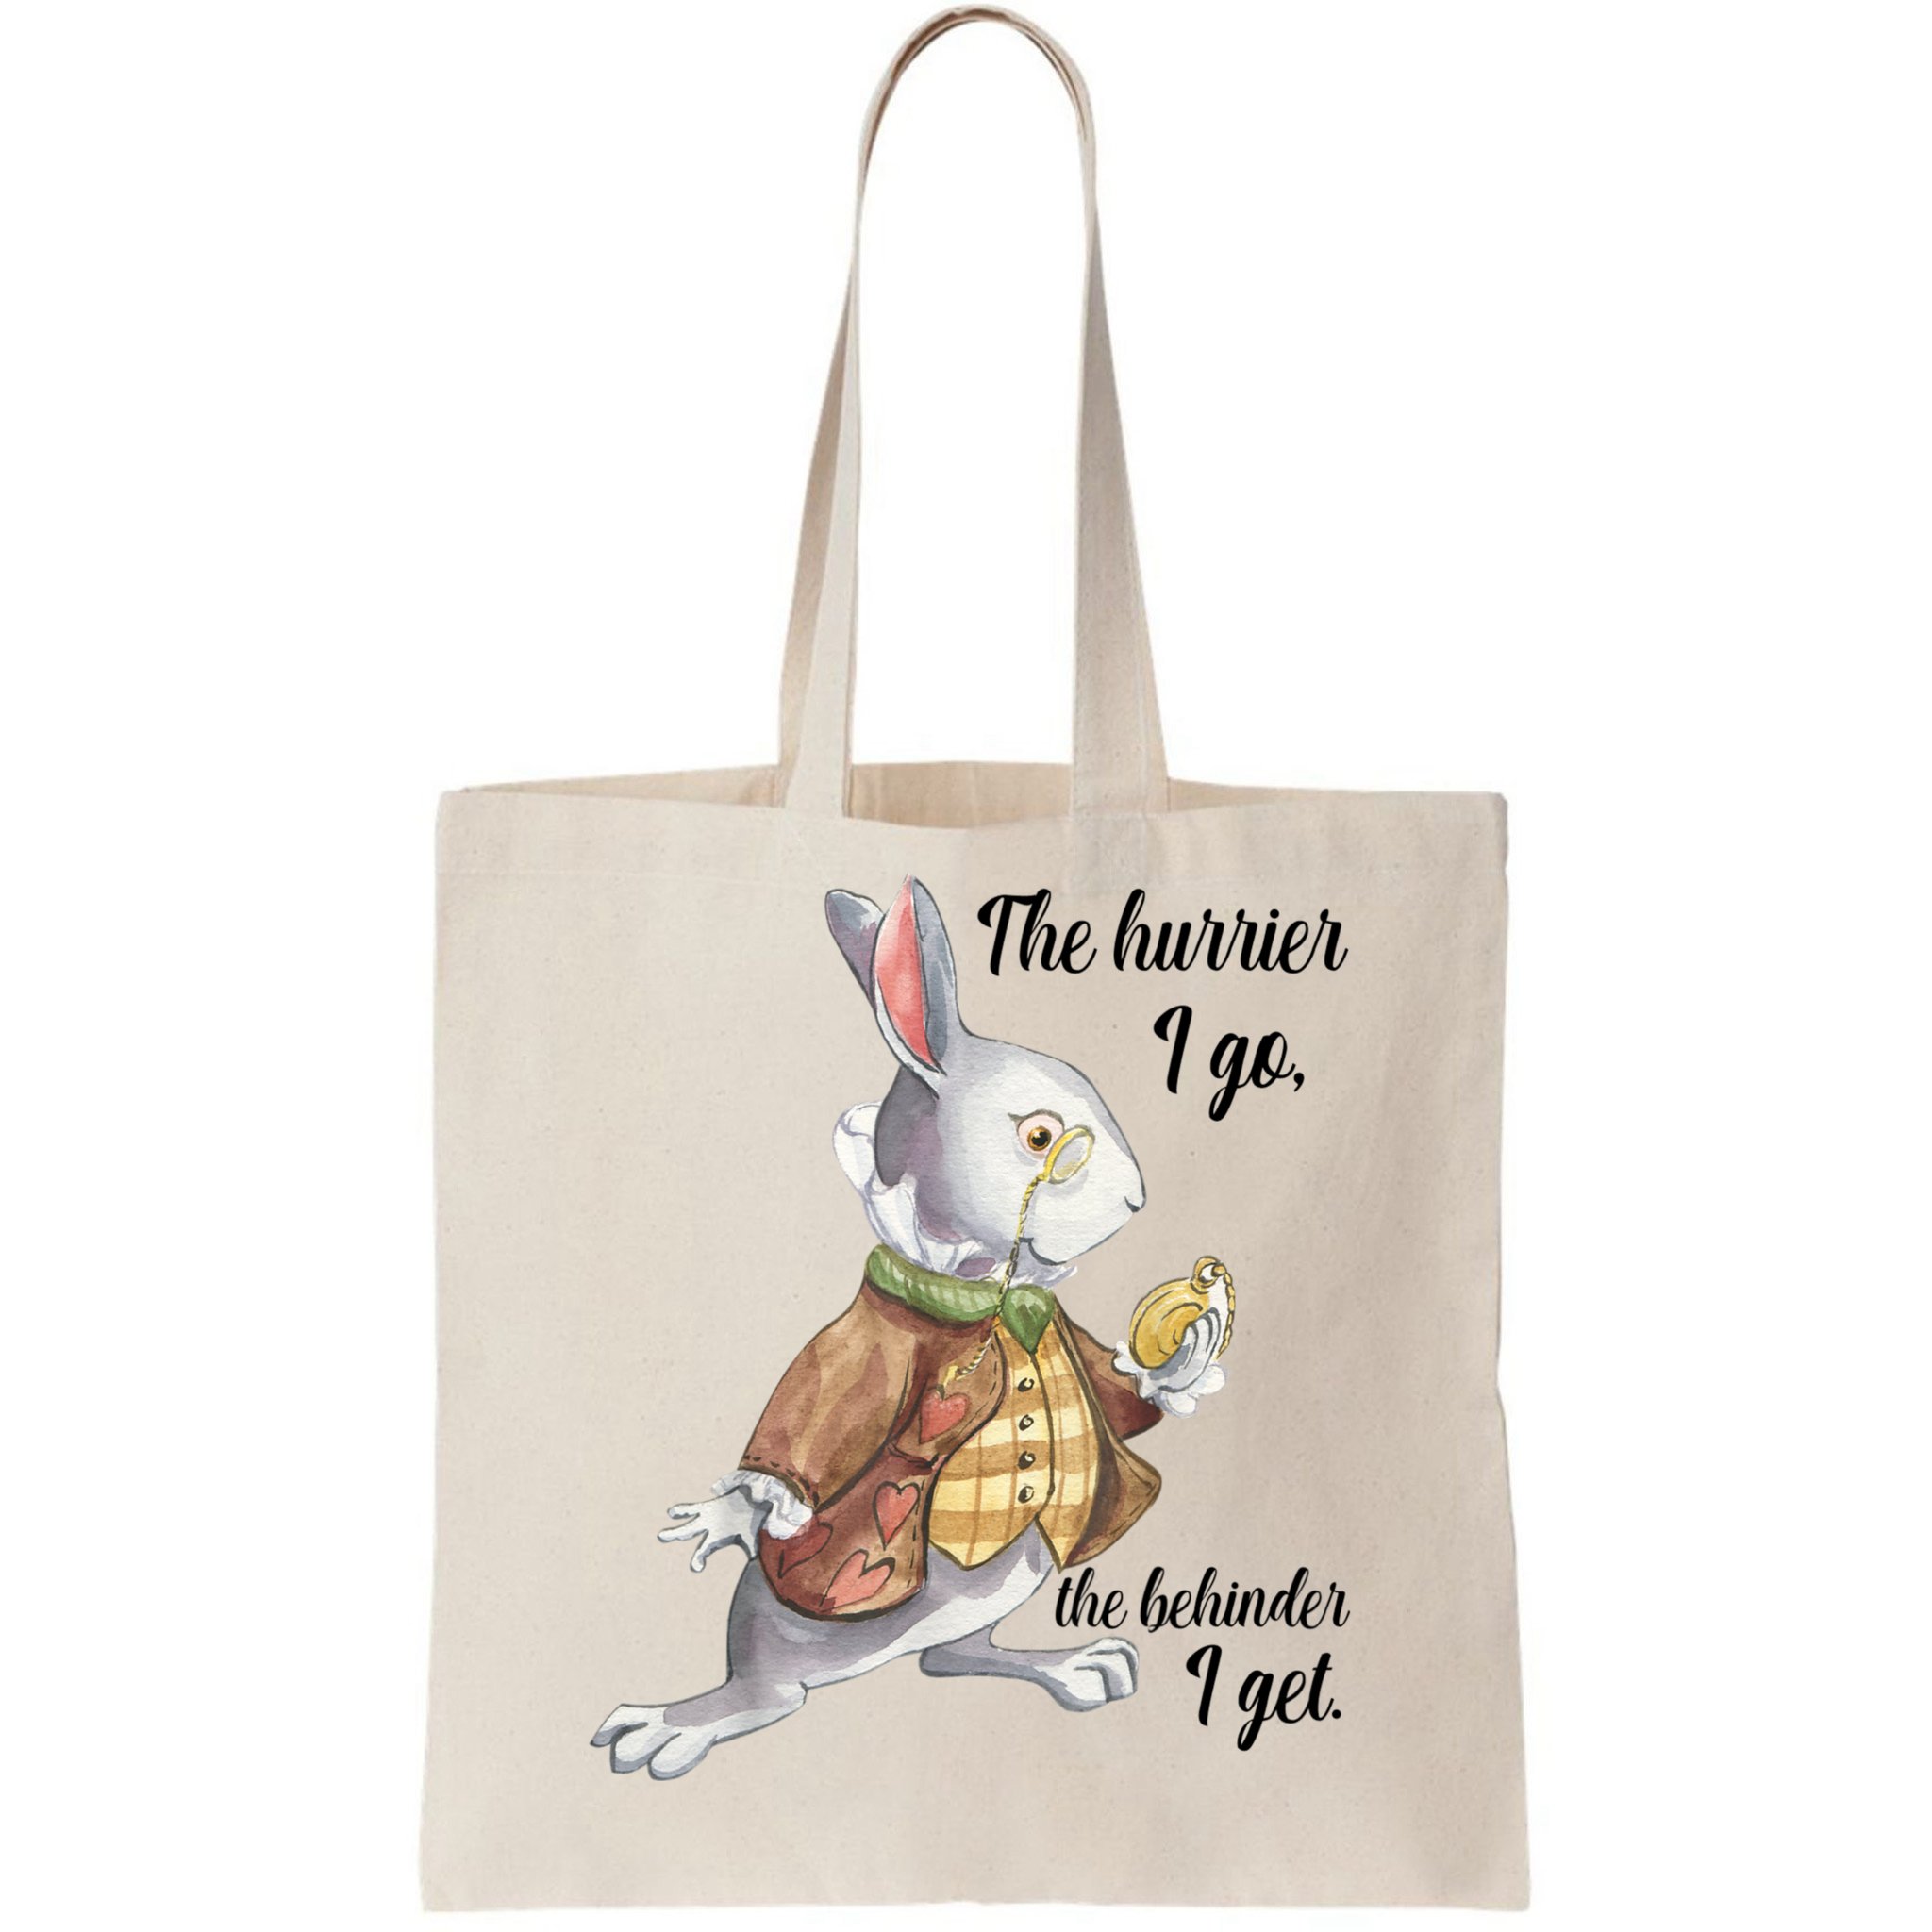 https://images3.teeshirtpalace.com/images/productImages/aiw9482153-alice-in-wonderland-white-rabbit-late-the-hurrier-i-go--natural-ltb-garment.jpg